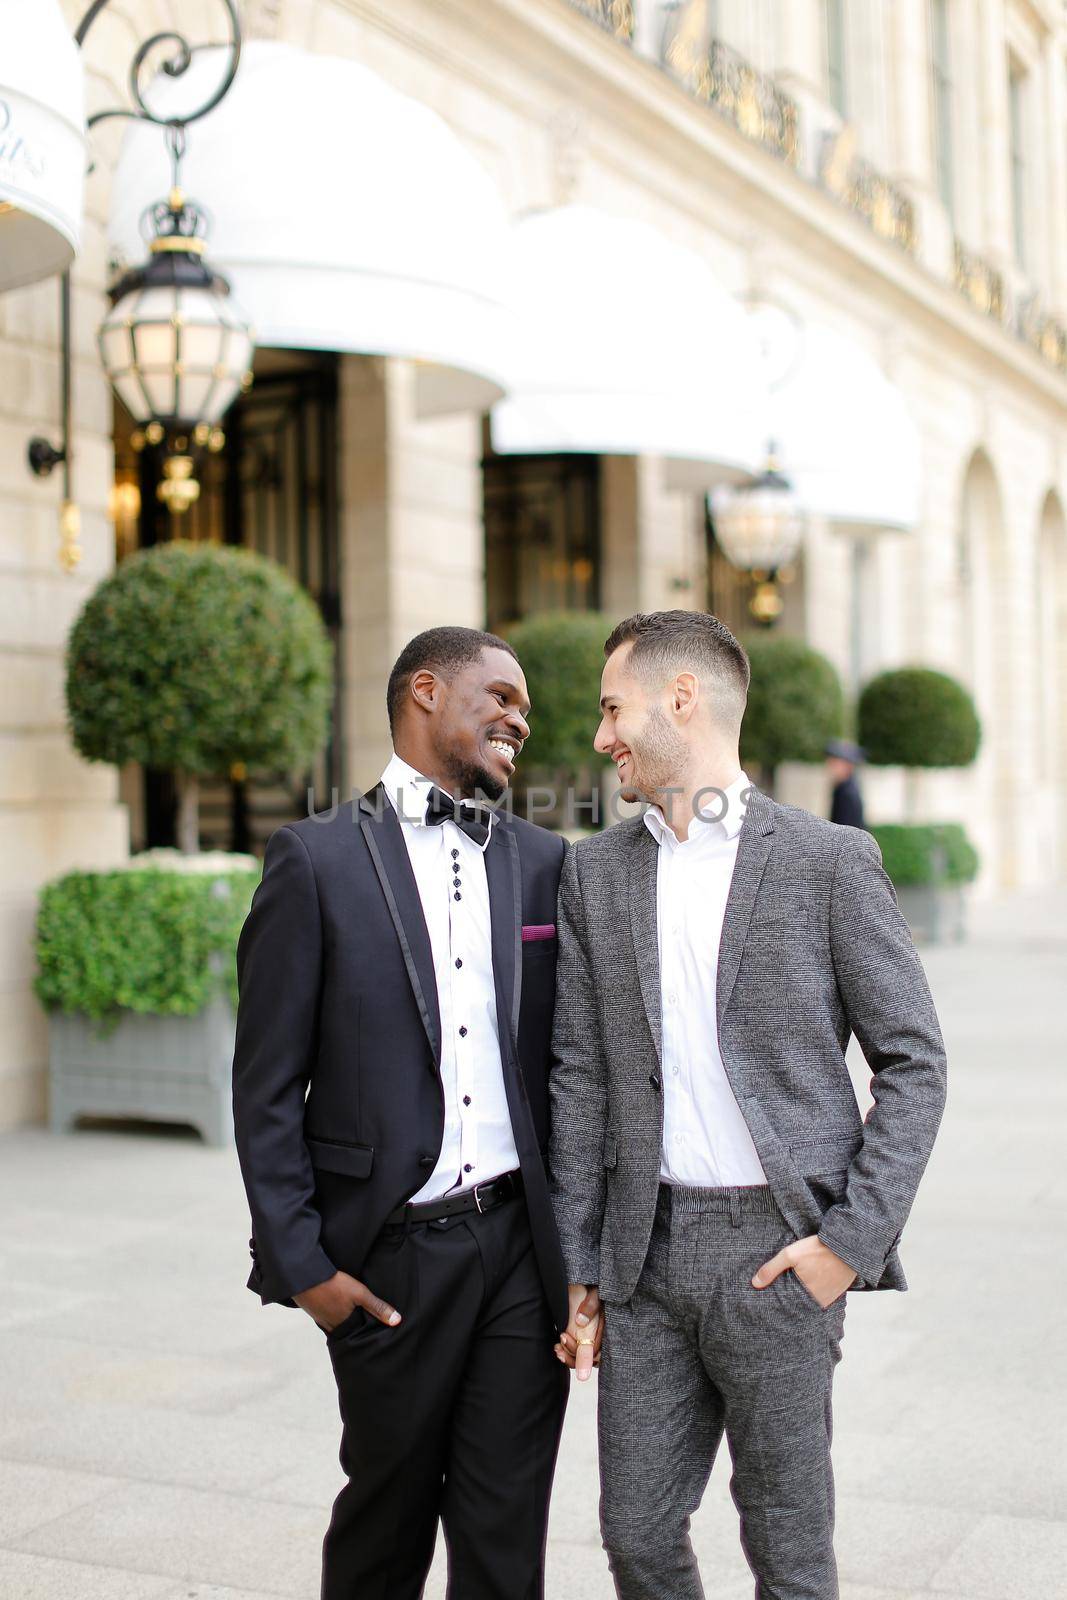 Afro american and caucasian happy gays walking outside in city. Concept of same sex male couple.